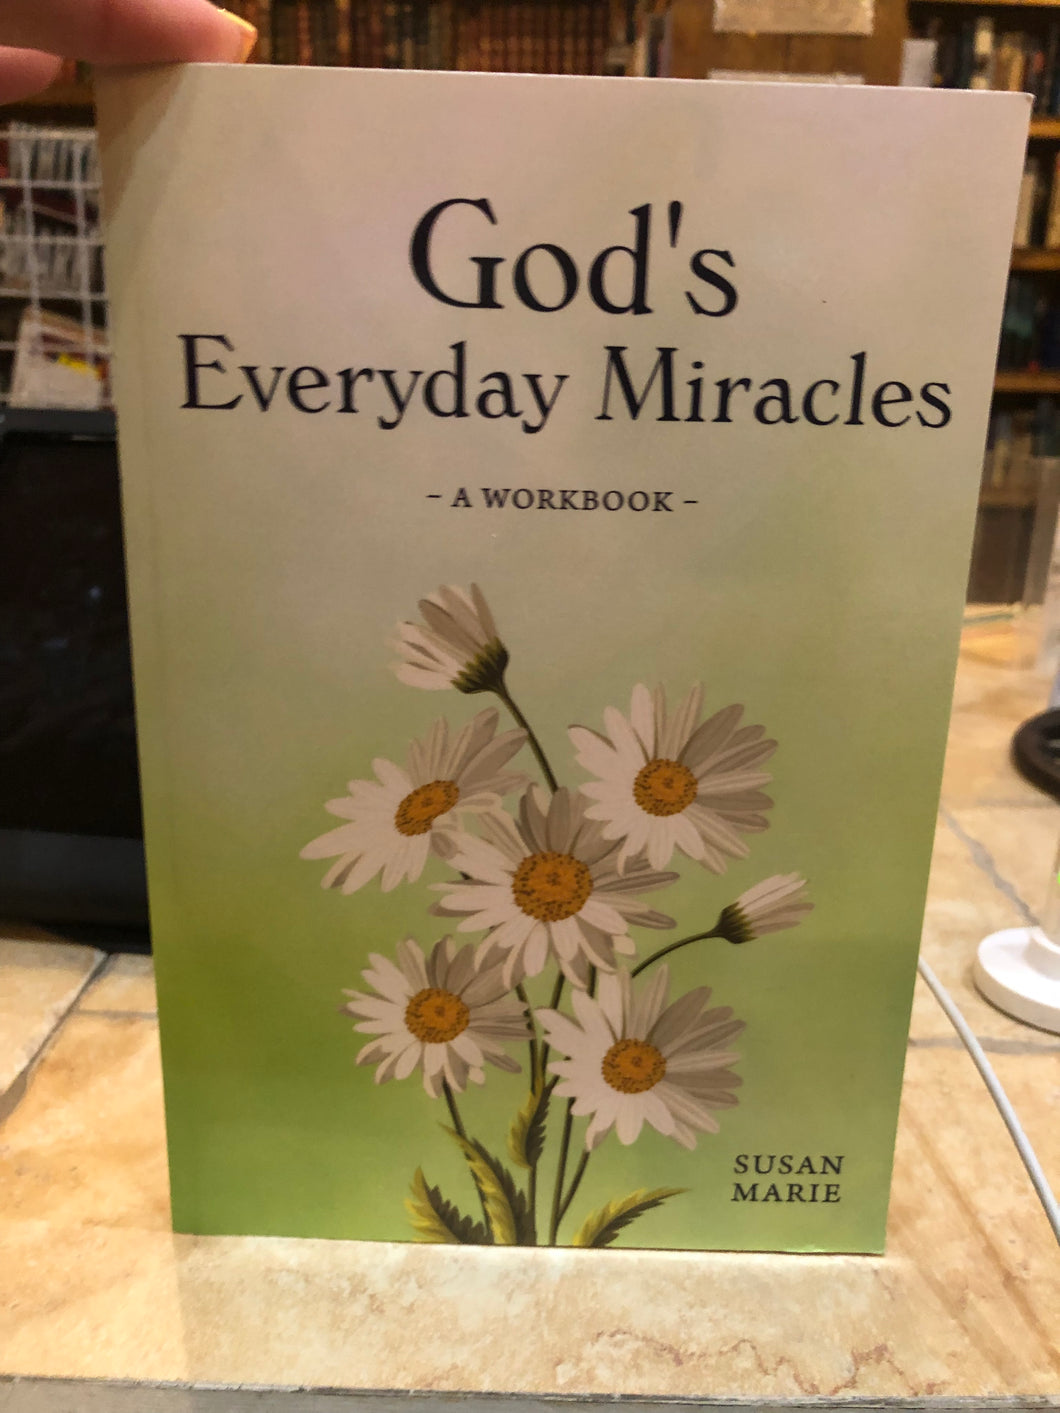 God's Everyday Miracles